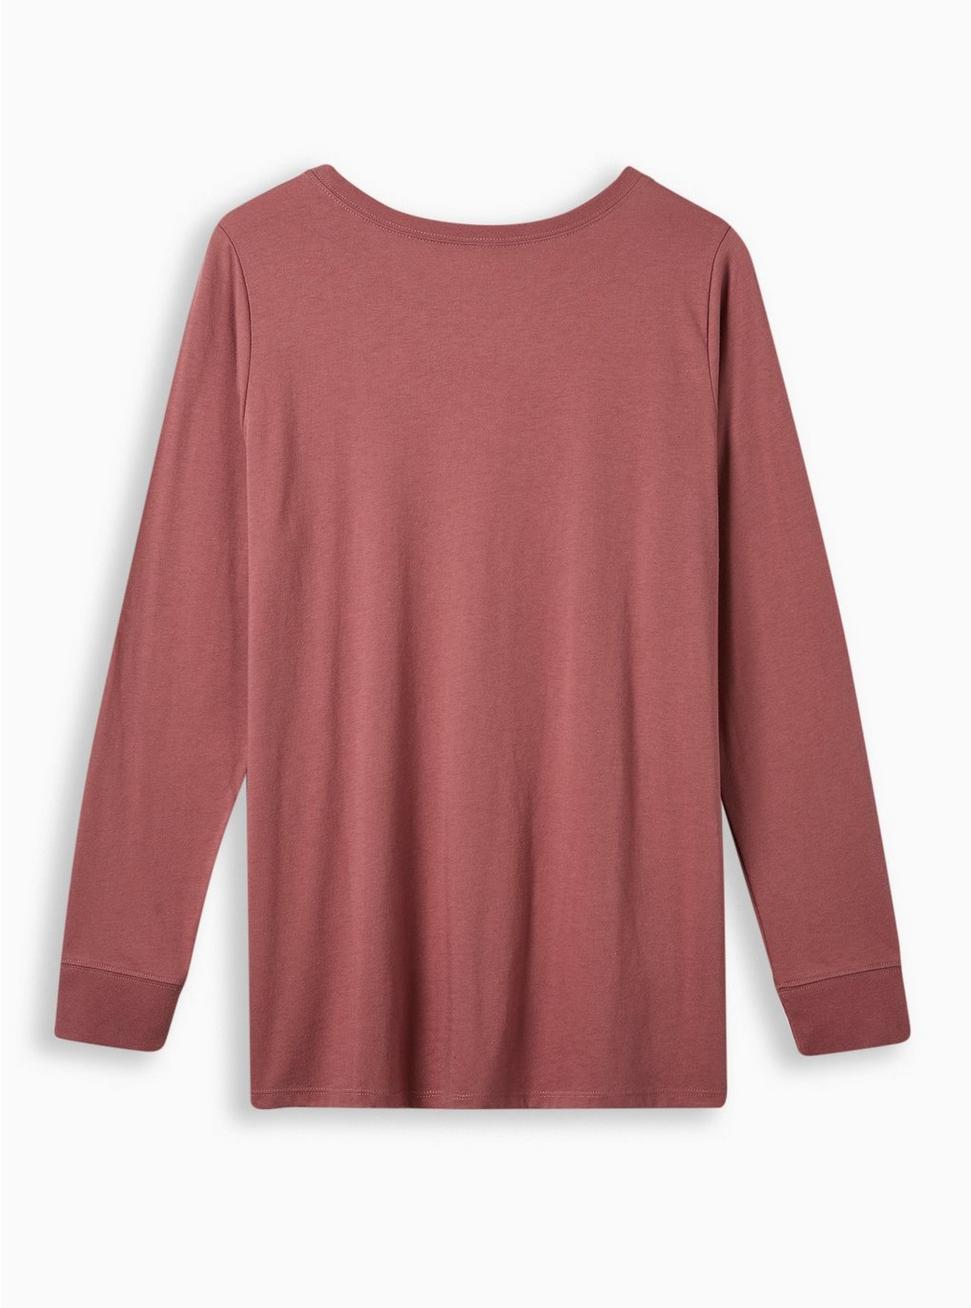 Plus Size My Entire Life Classic Fit Signature Jersey Crew Neck Long Sleeve Tee, WILD GINGER BURGUNDY, alternate